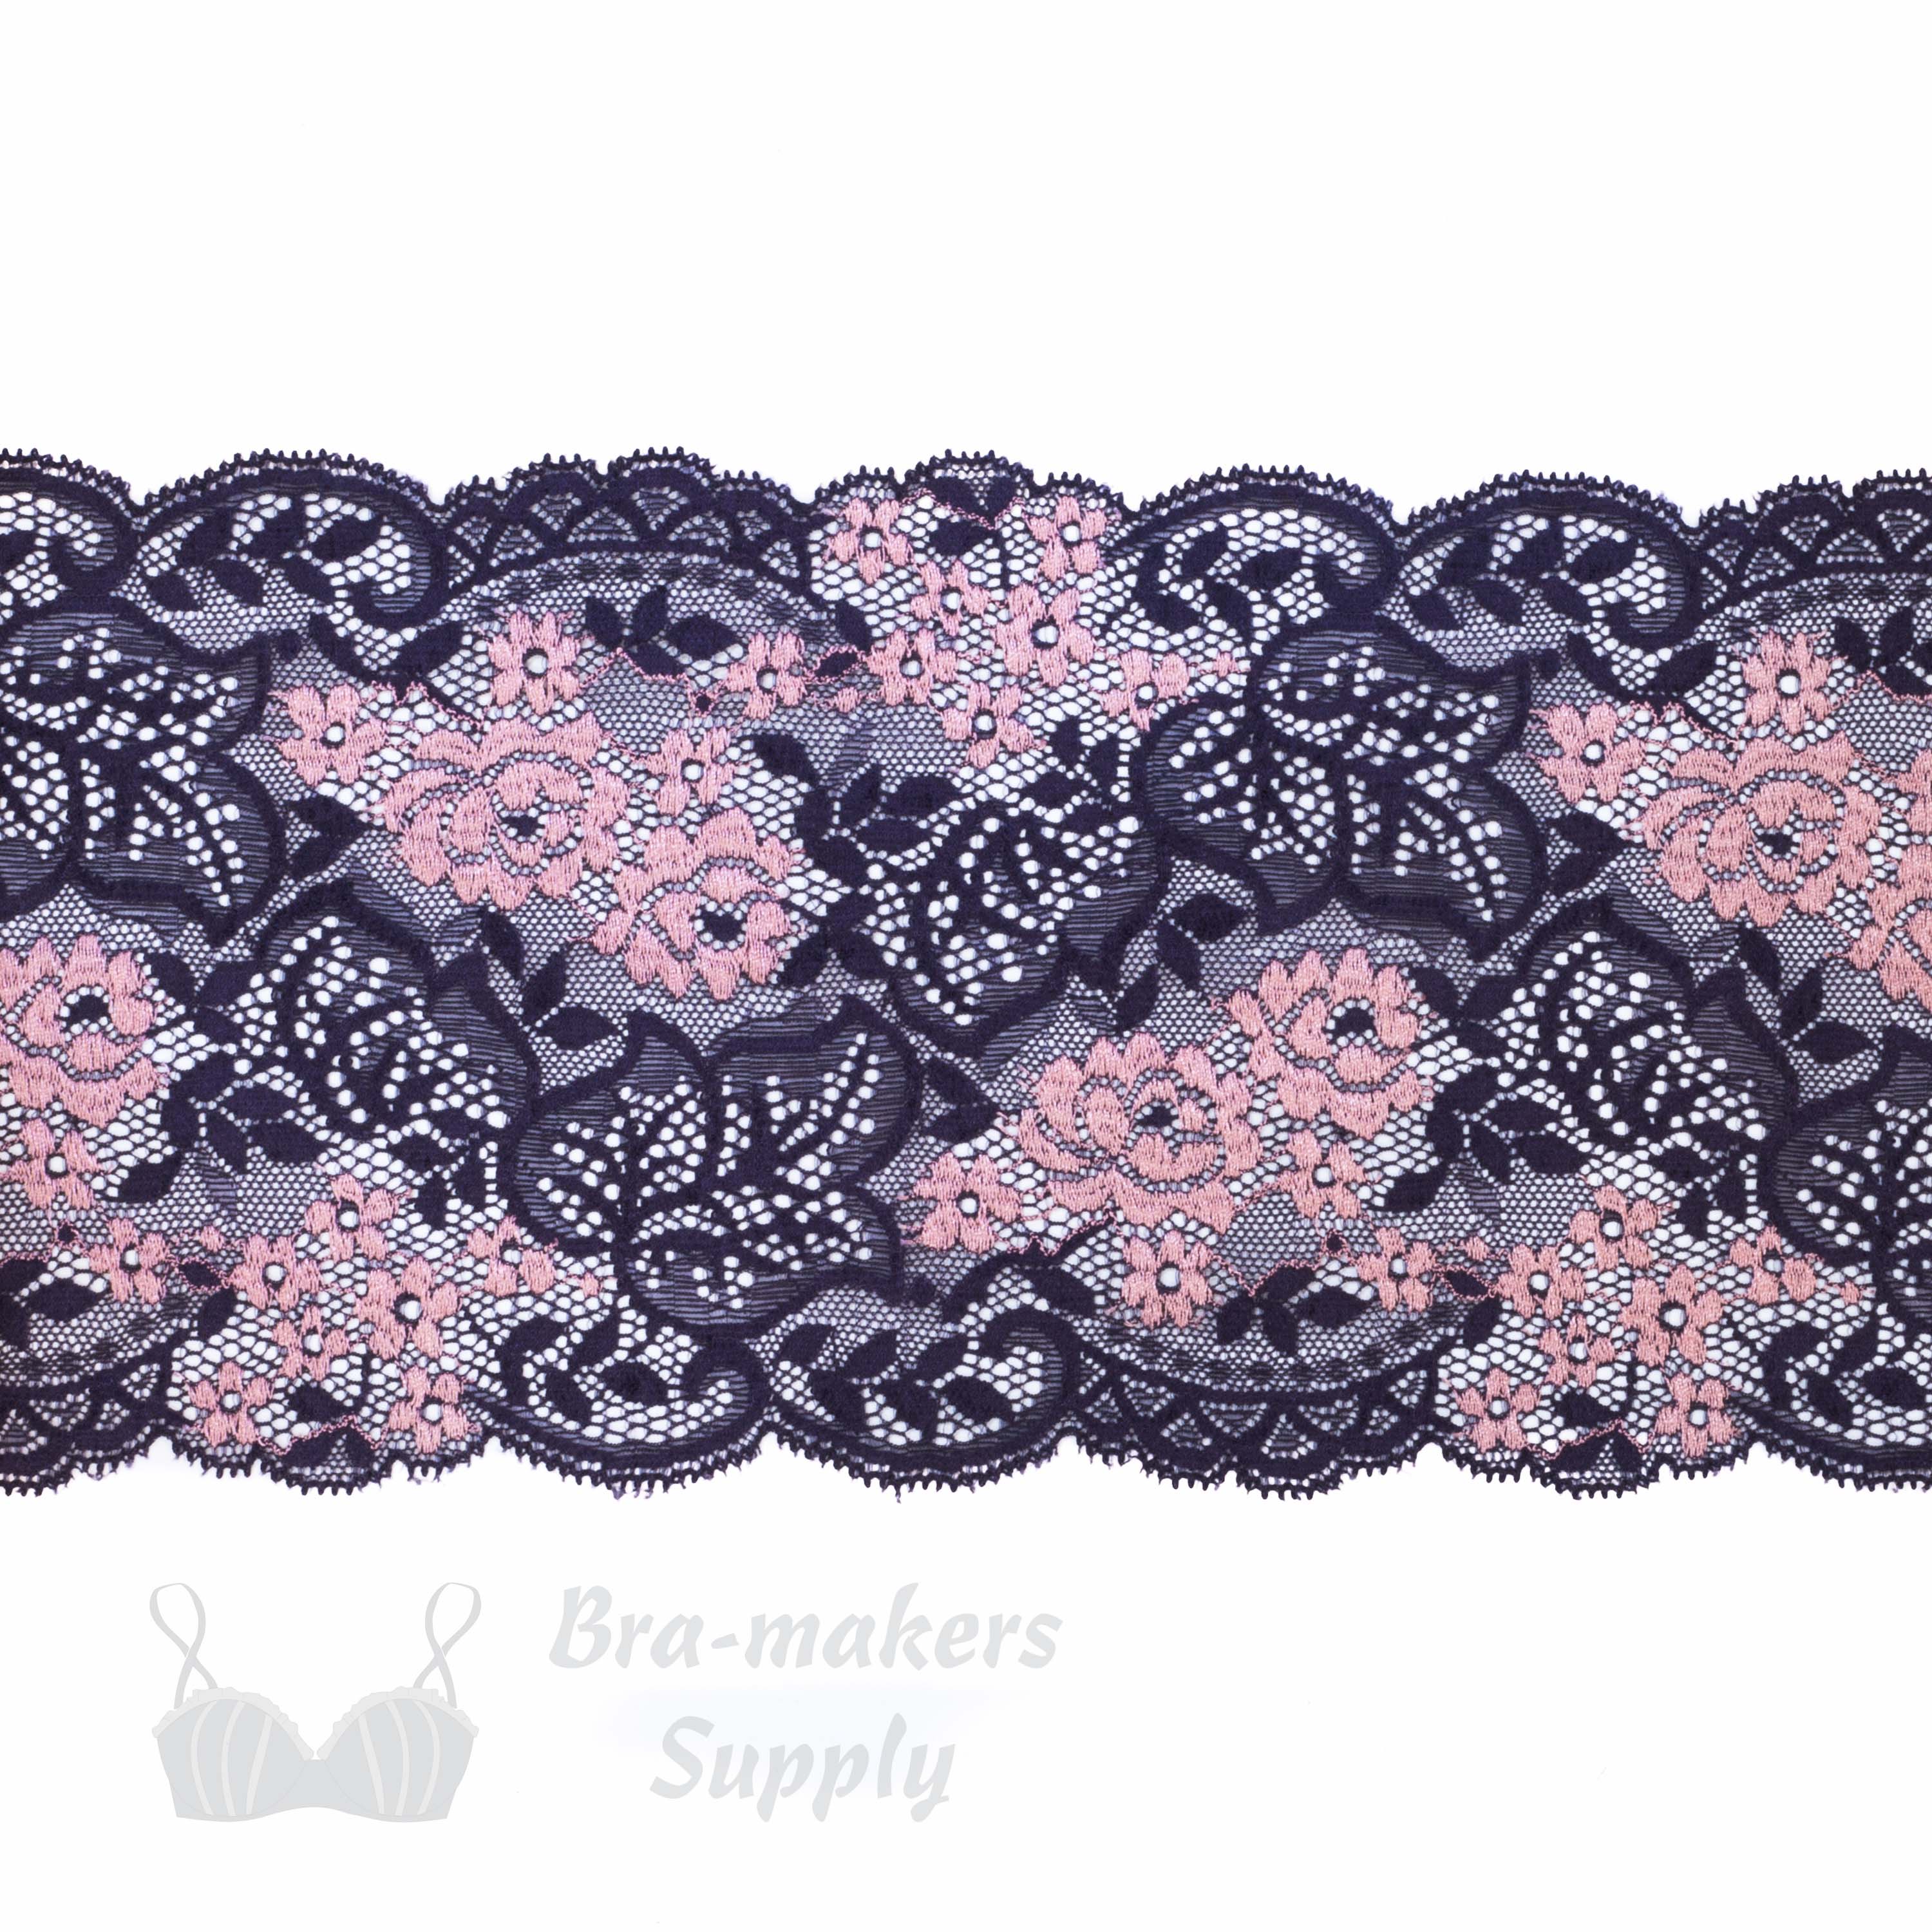 stretch laces - 6 inch - 15 cm six inch eggplant pink floral stretch lace LS-63 5908 from Bra-Makers Supply